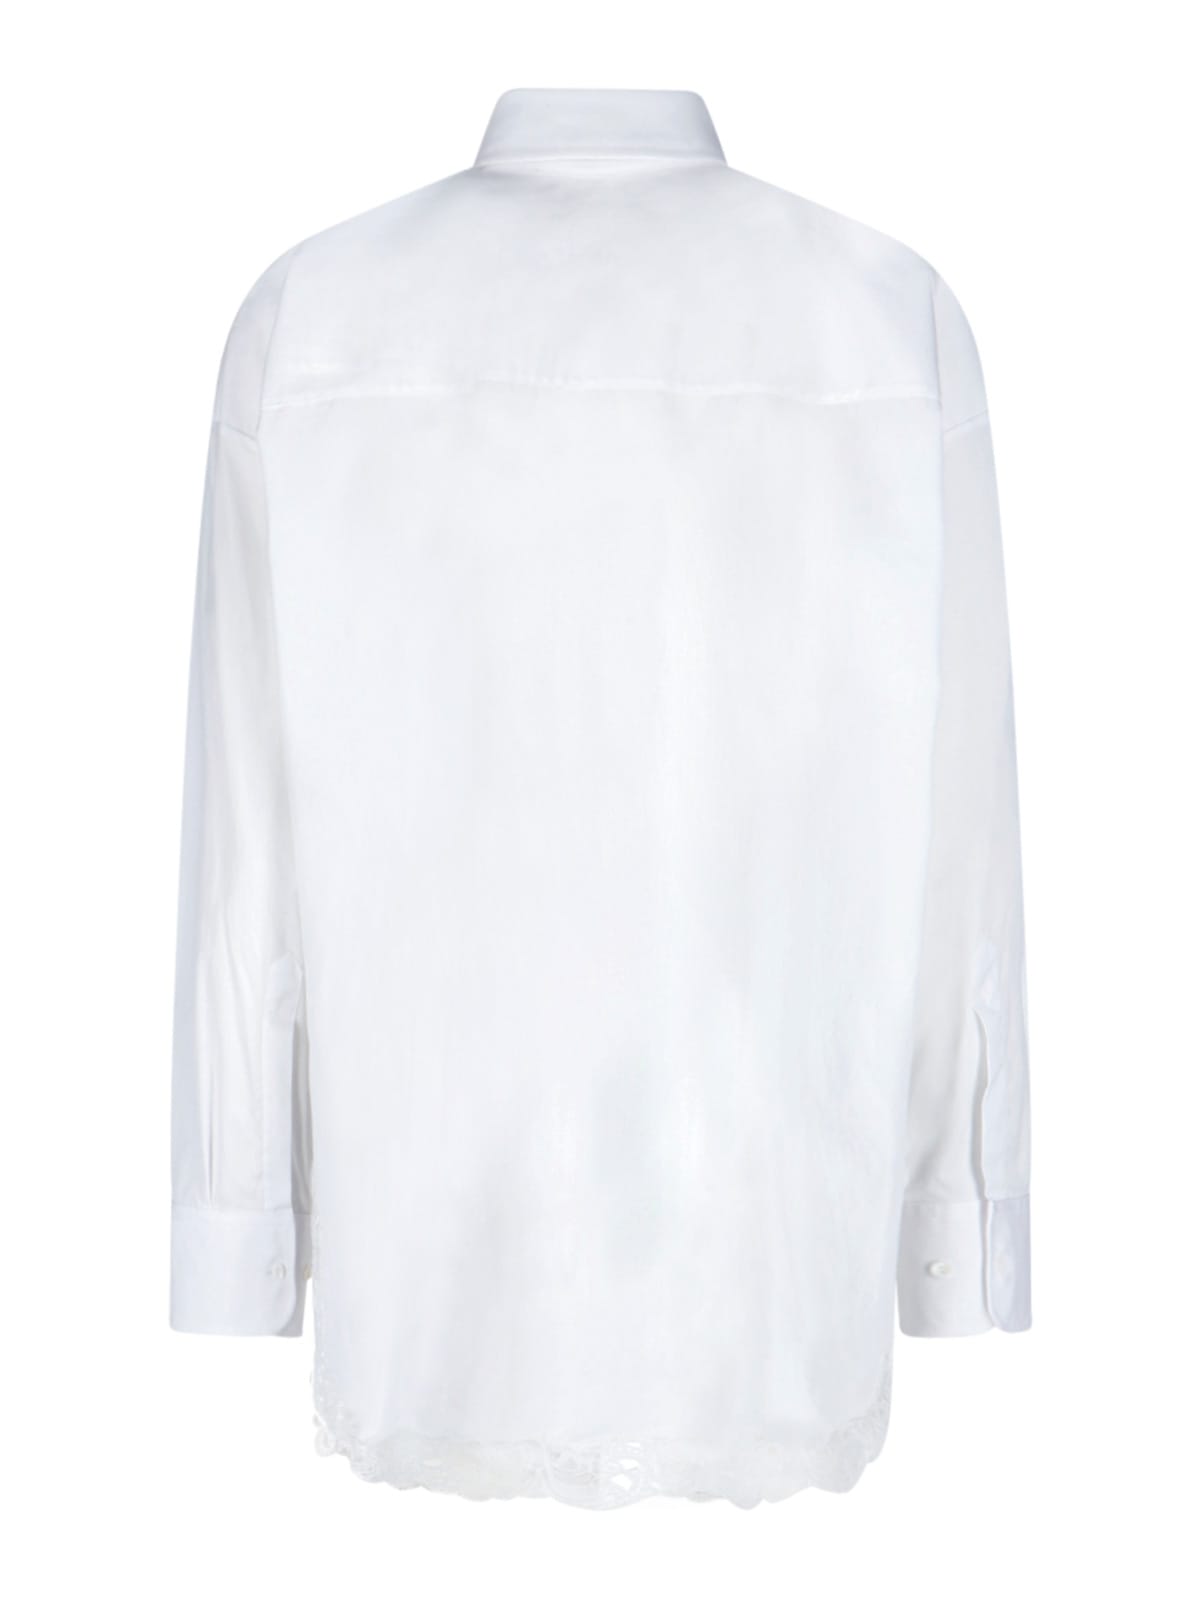 Ermanno Scervino Lace Detail Shirt In Bianco